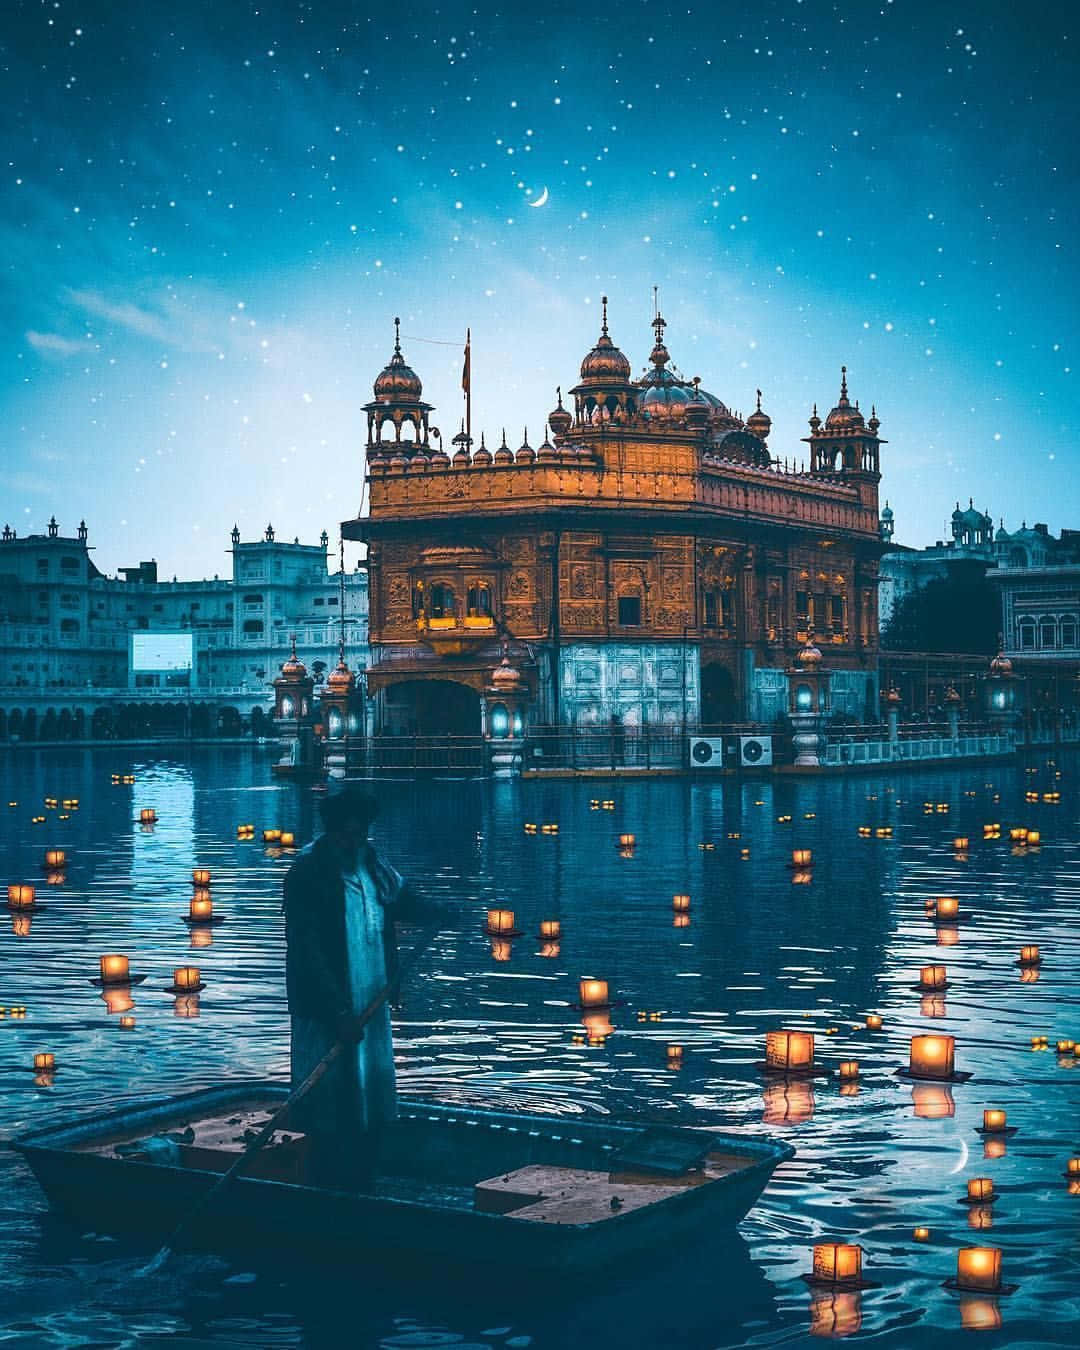 Majestic Golden Temple in Amritsar reflecting off the serene water